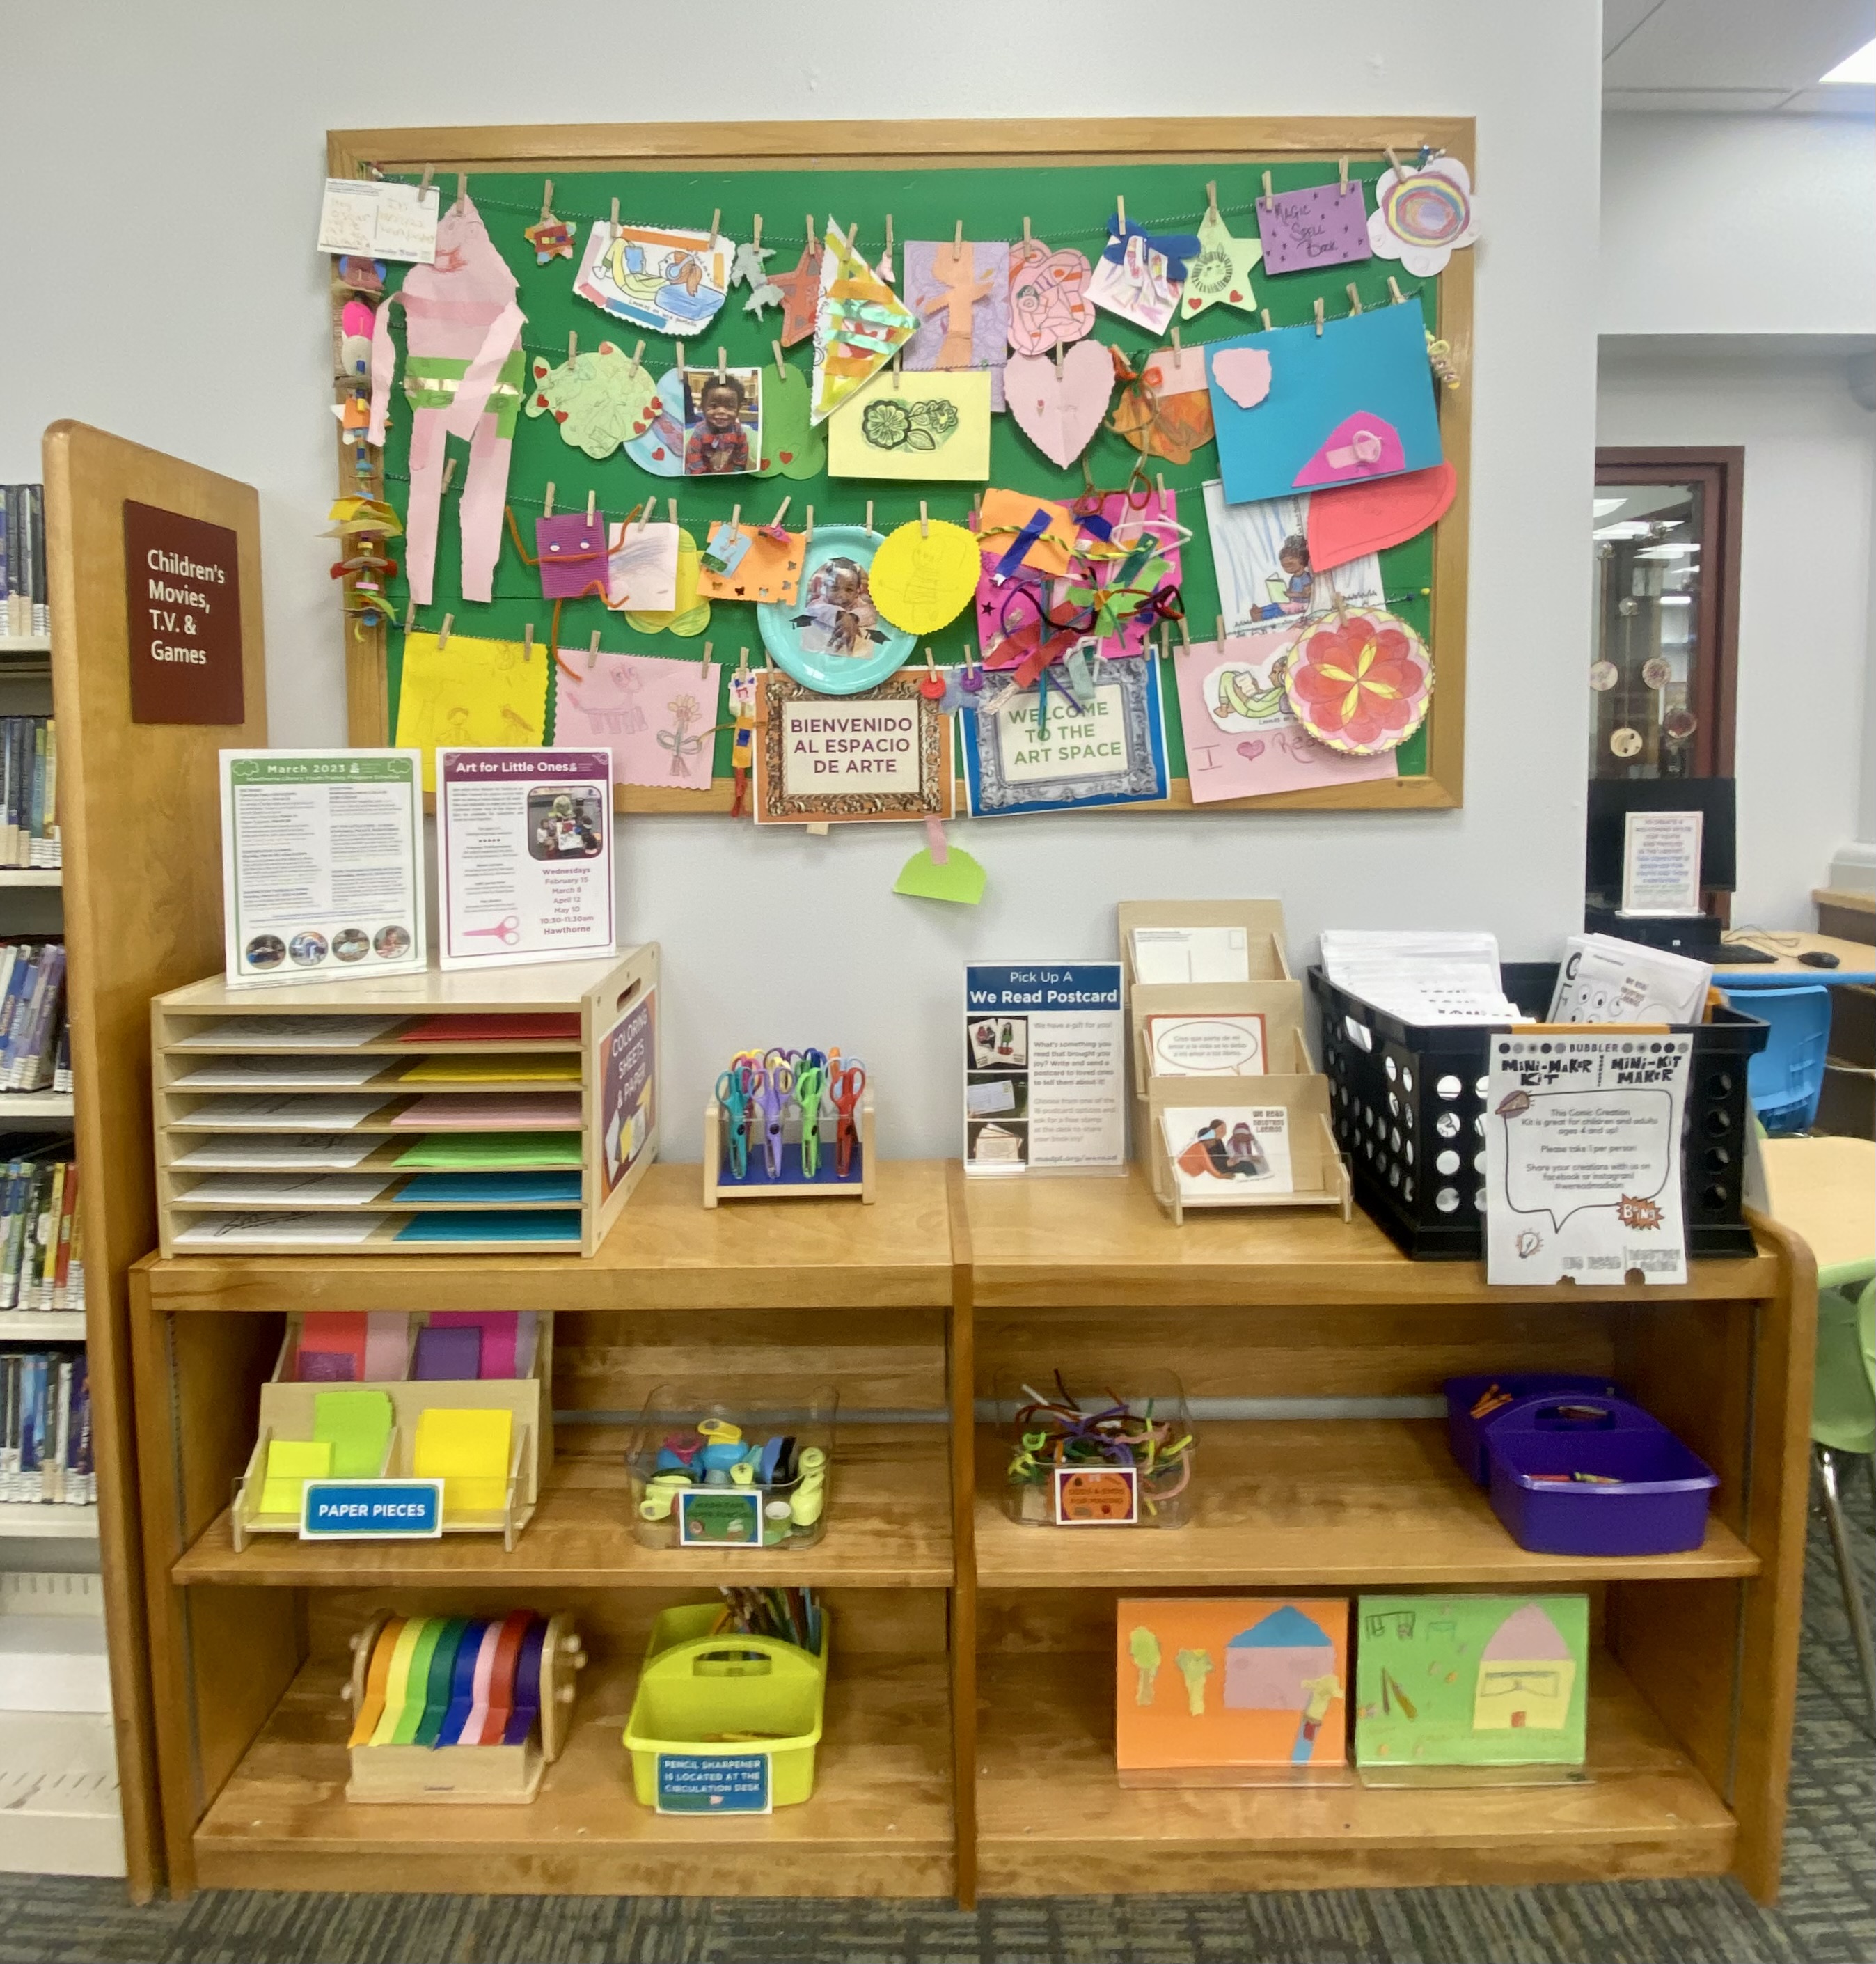 Enjoy art and making at Madison Public Library play spaces year round